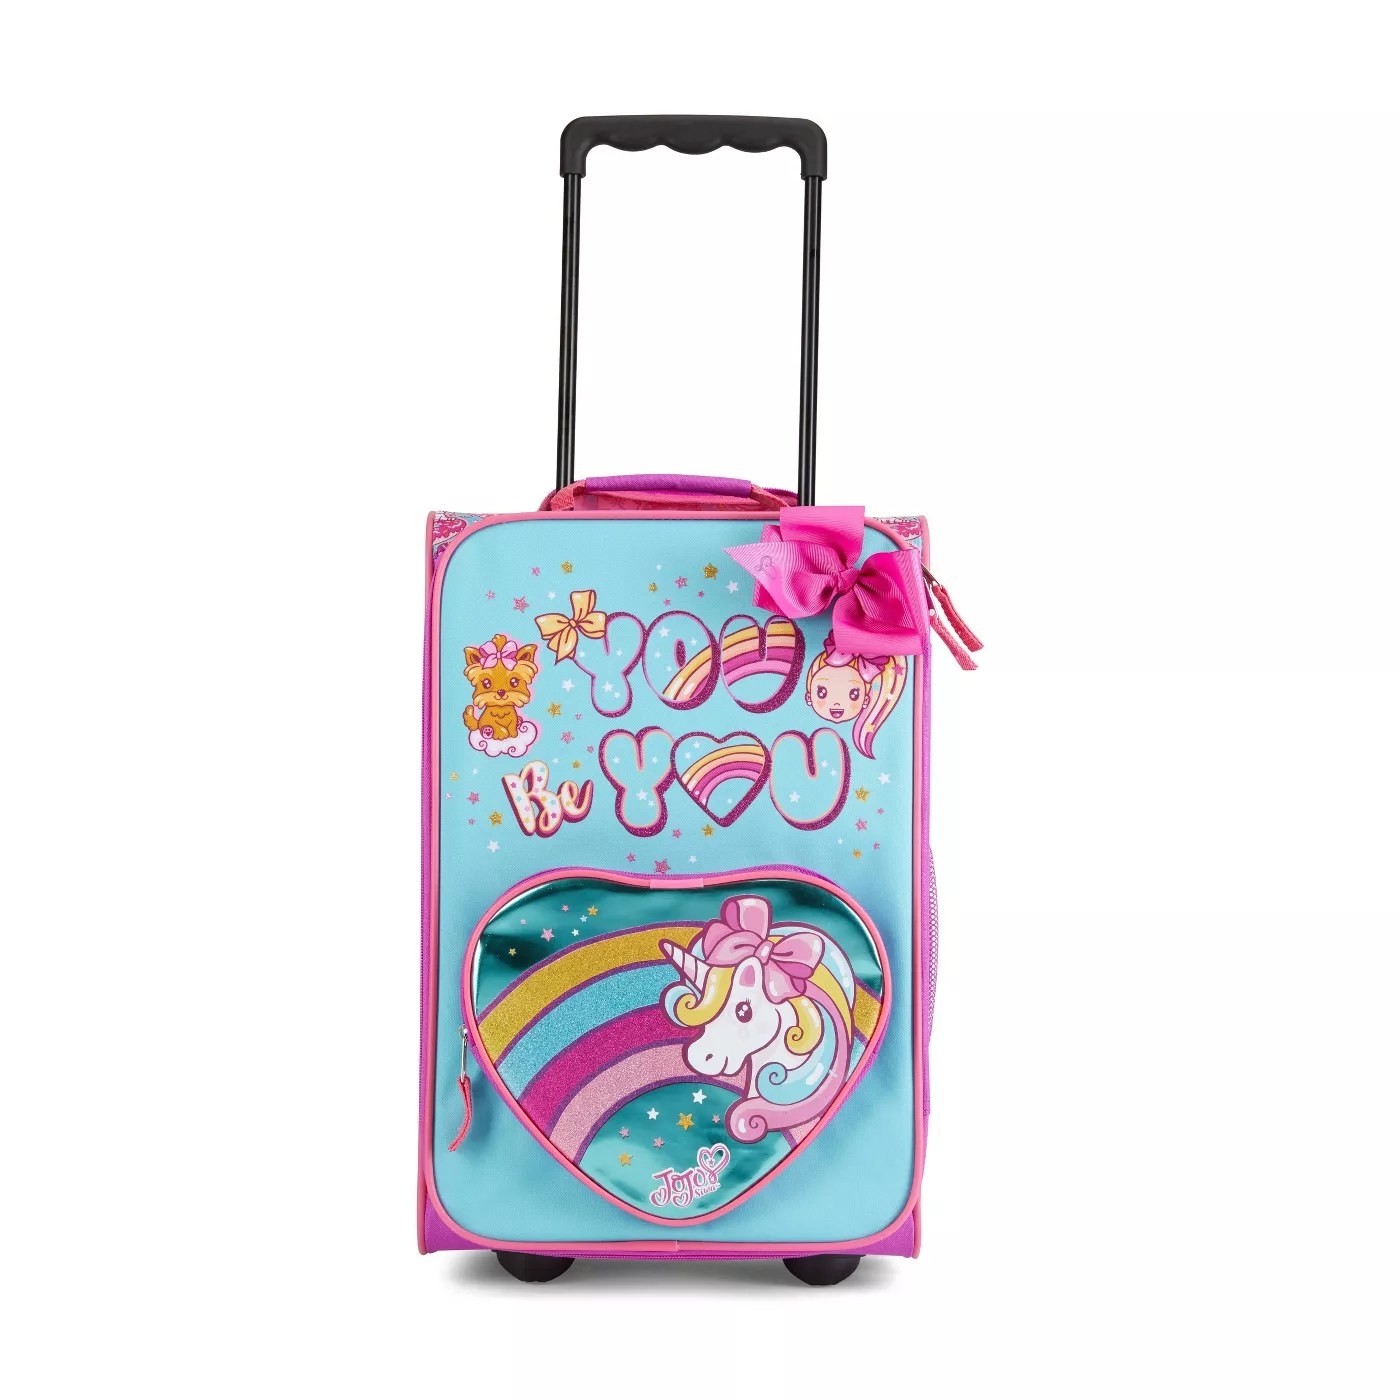 The You Be You unicorn suitcase